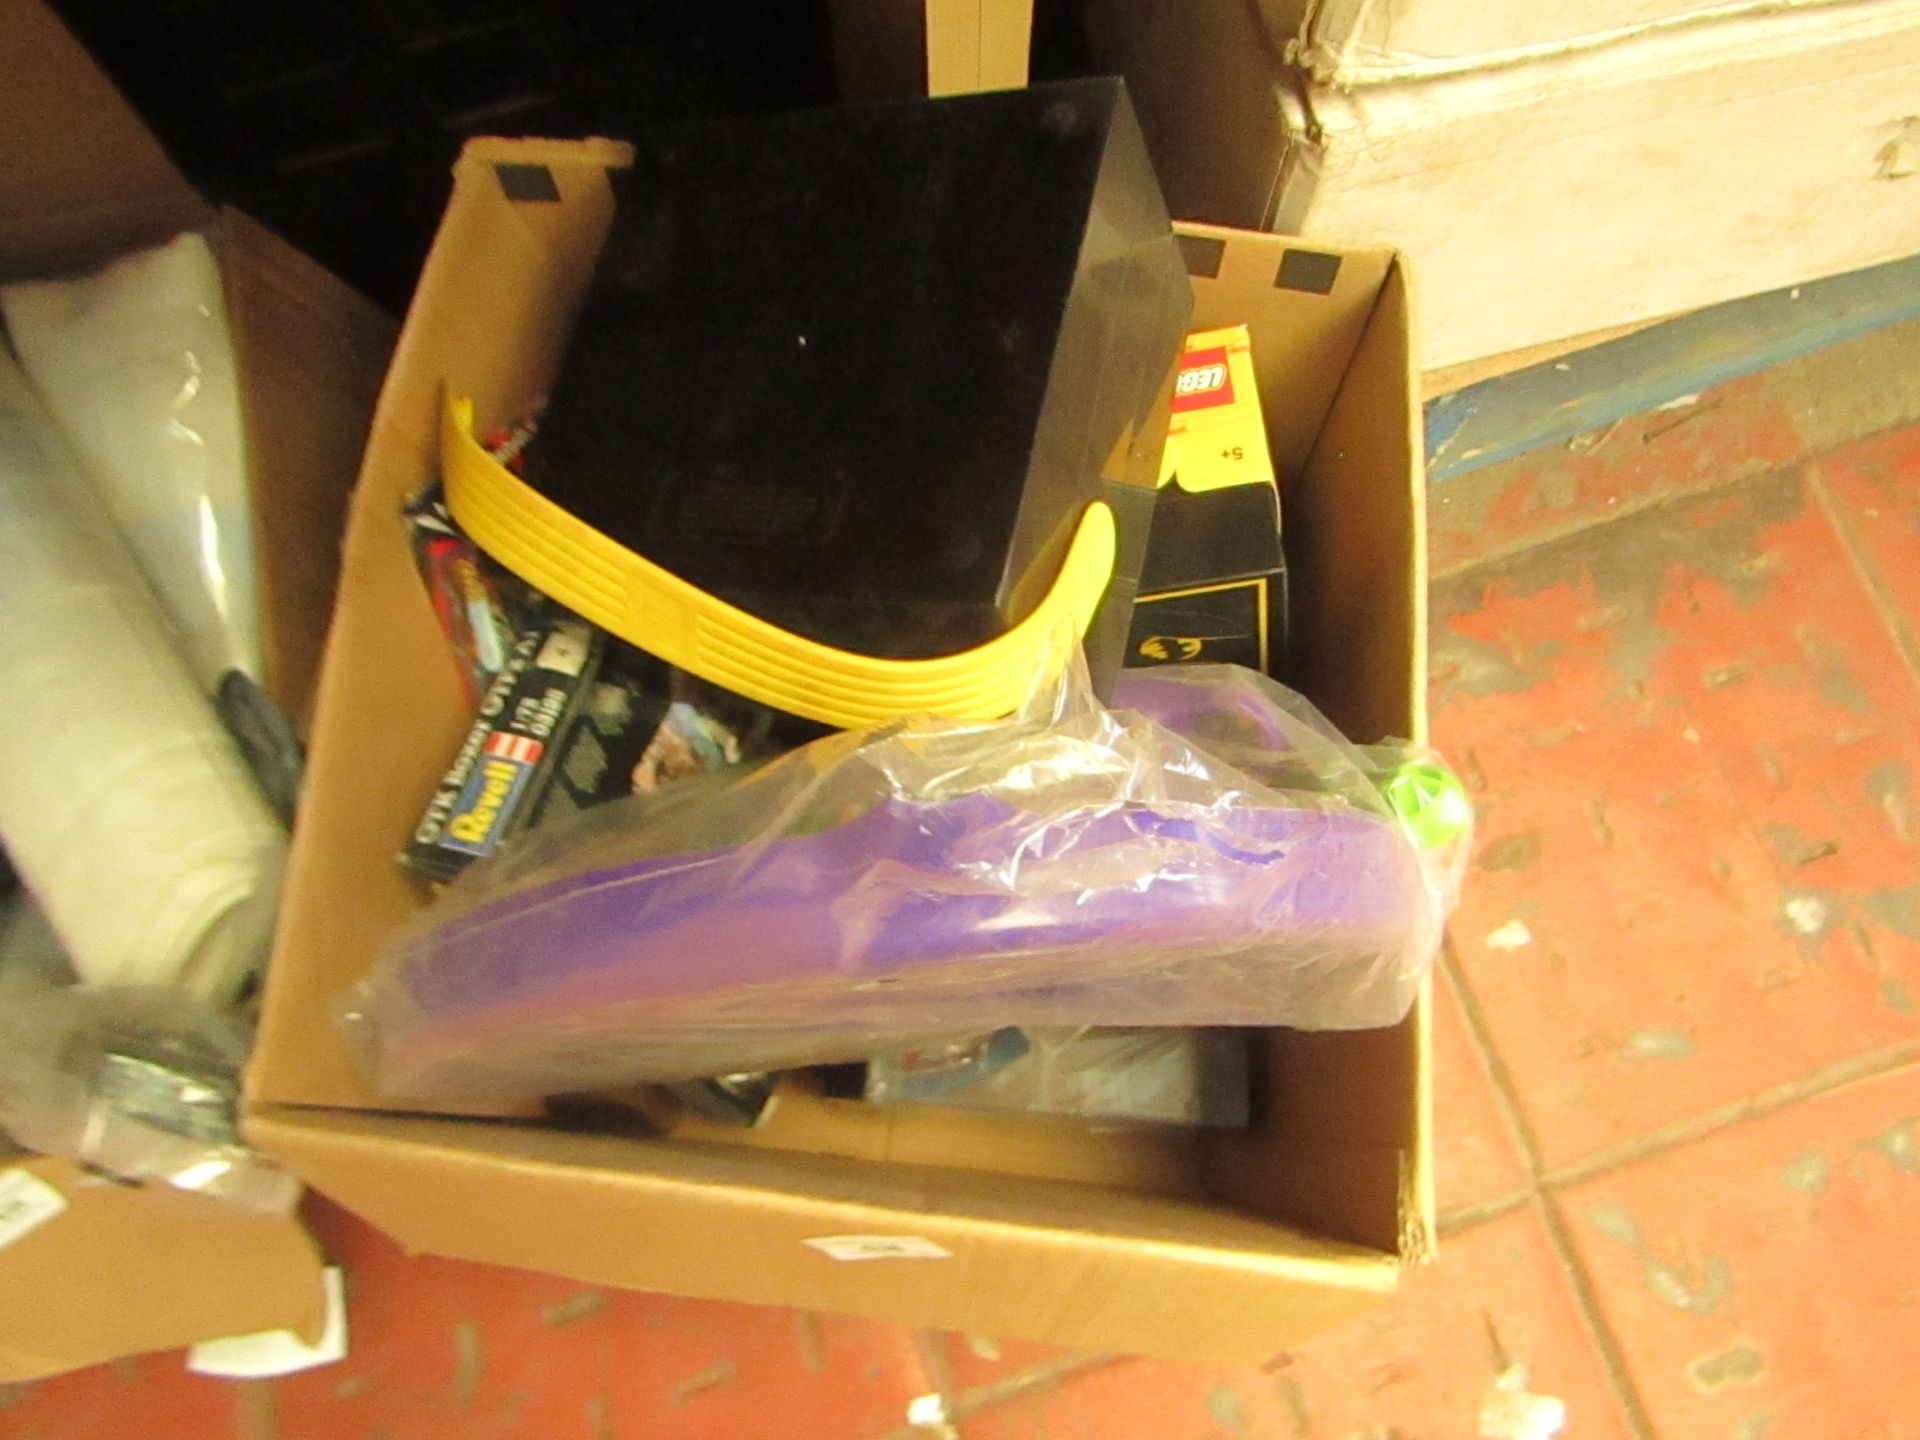 Box of Approx 8 Toys. See Image